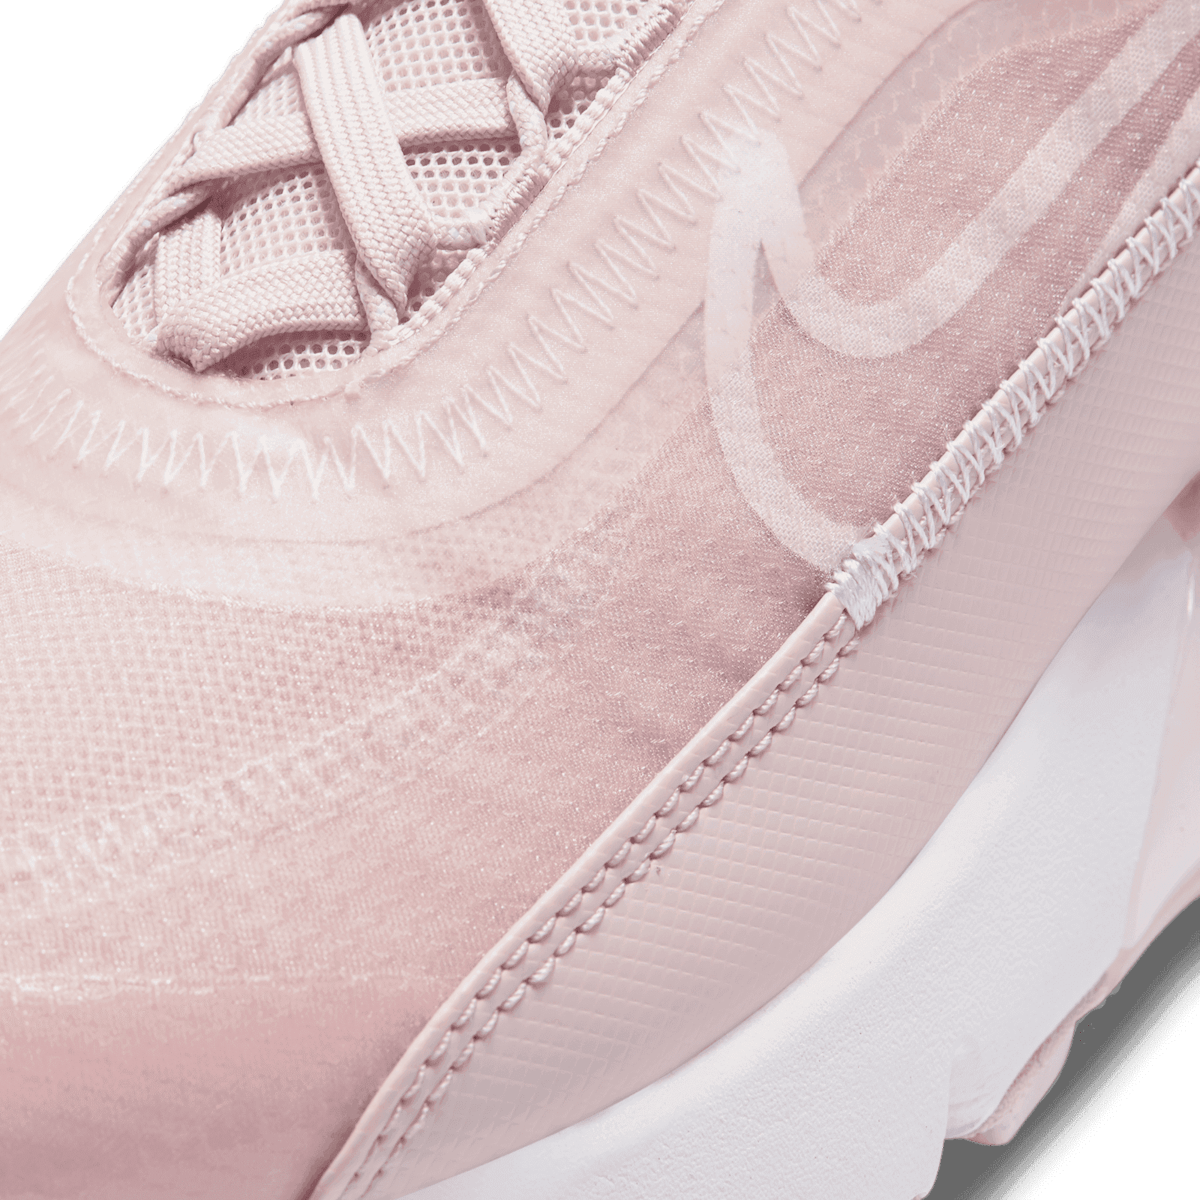 Nike Air Max 2090 Shoes in Pink Angle 4